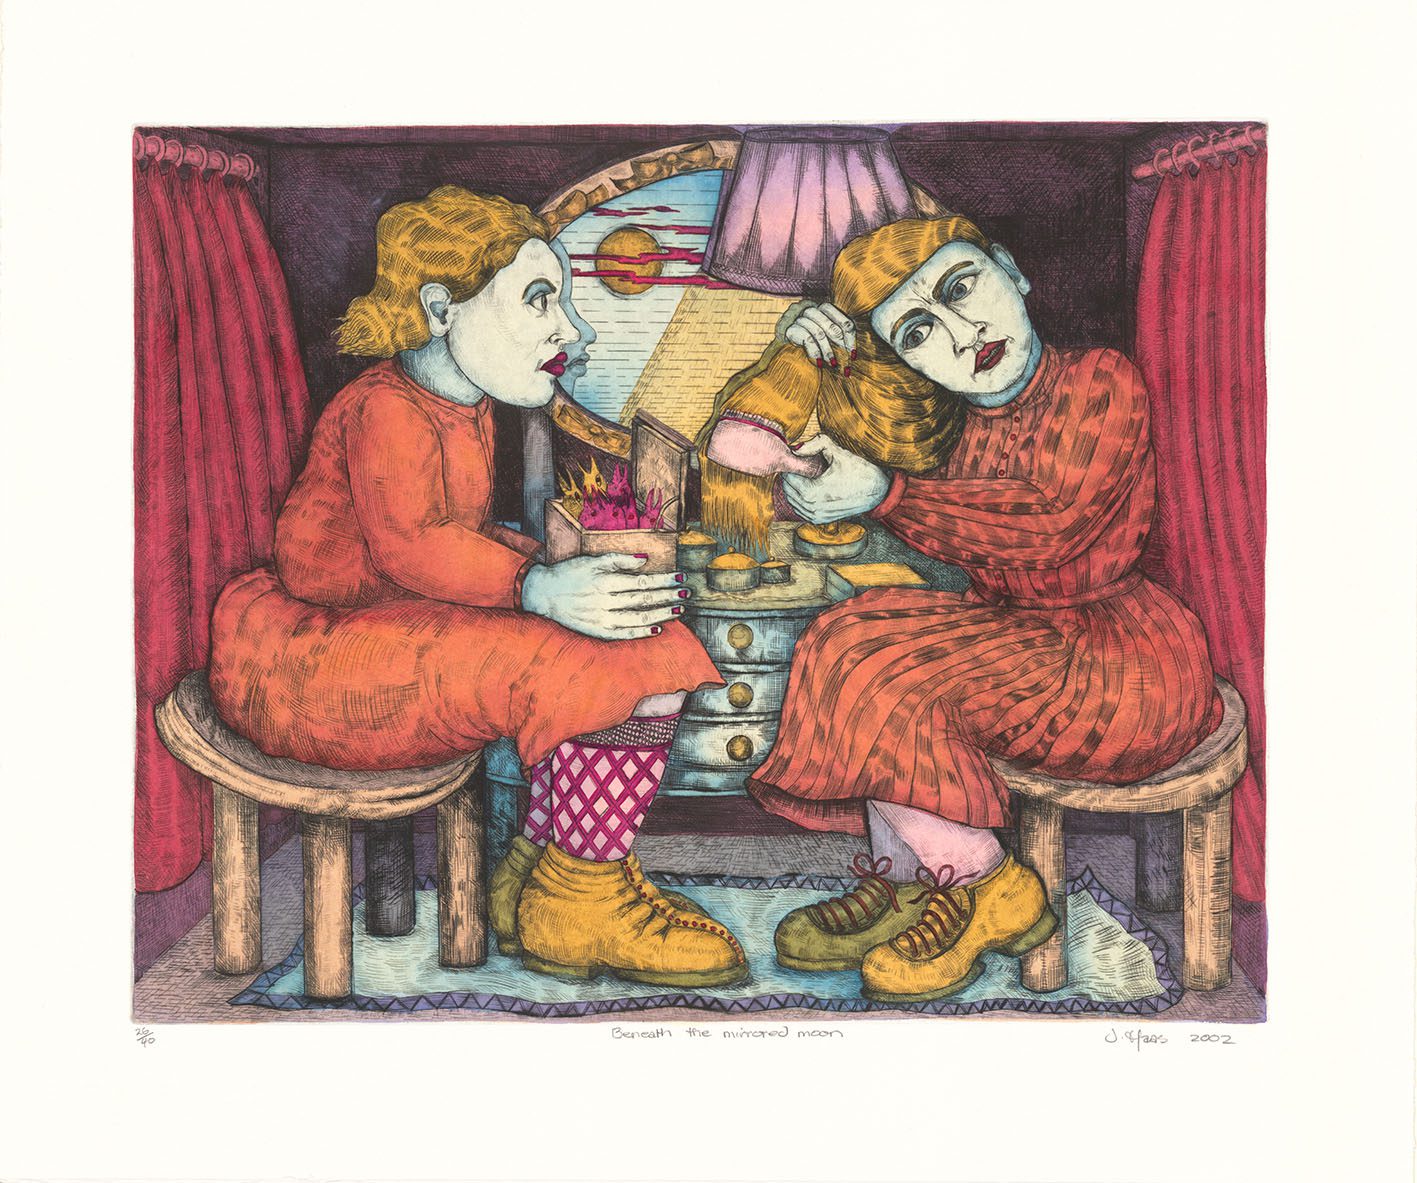 Juli Haas, Beneath the mirrored moon, 2002, Drypoint print with watercolour, Ed 26/40, 40 x 49 cm, Latrobe Regional Gallery Collection, purchased from the Print Council of Australia, 2002.